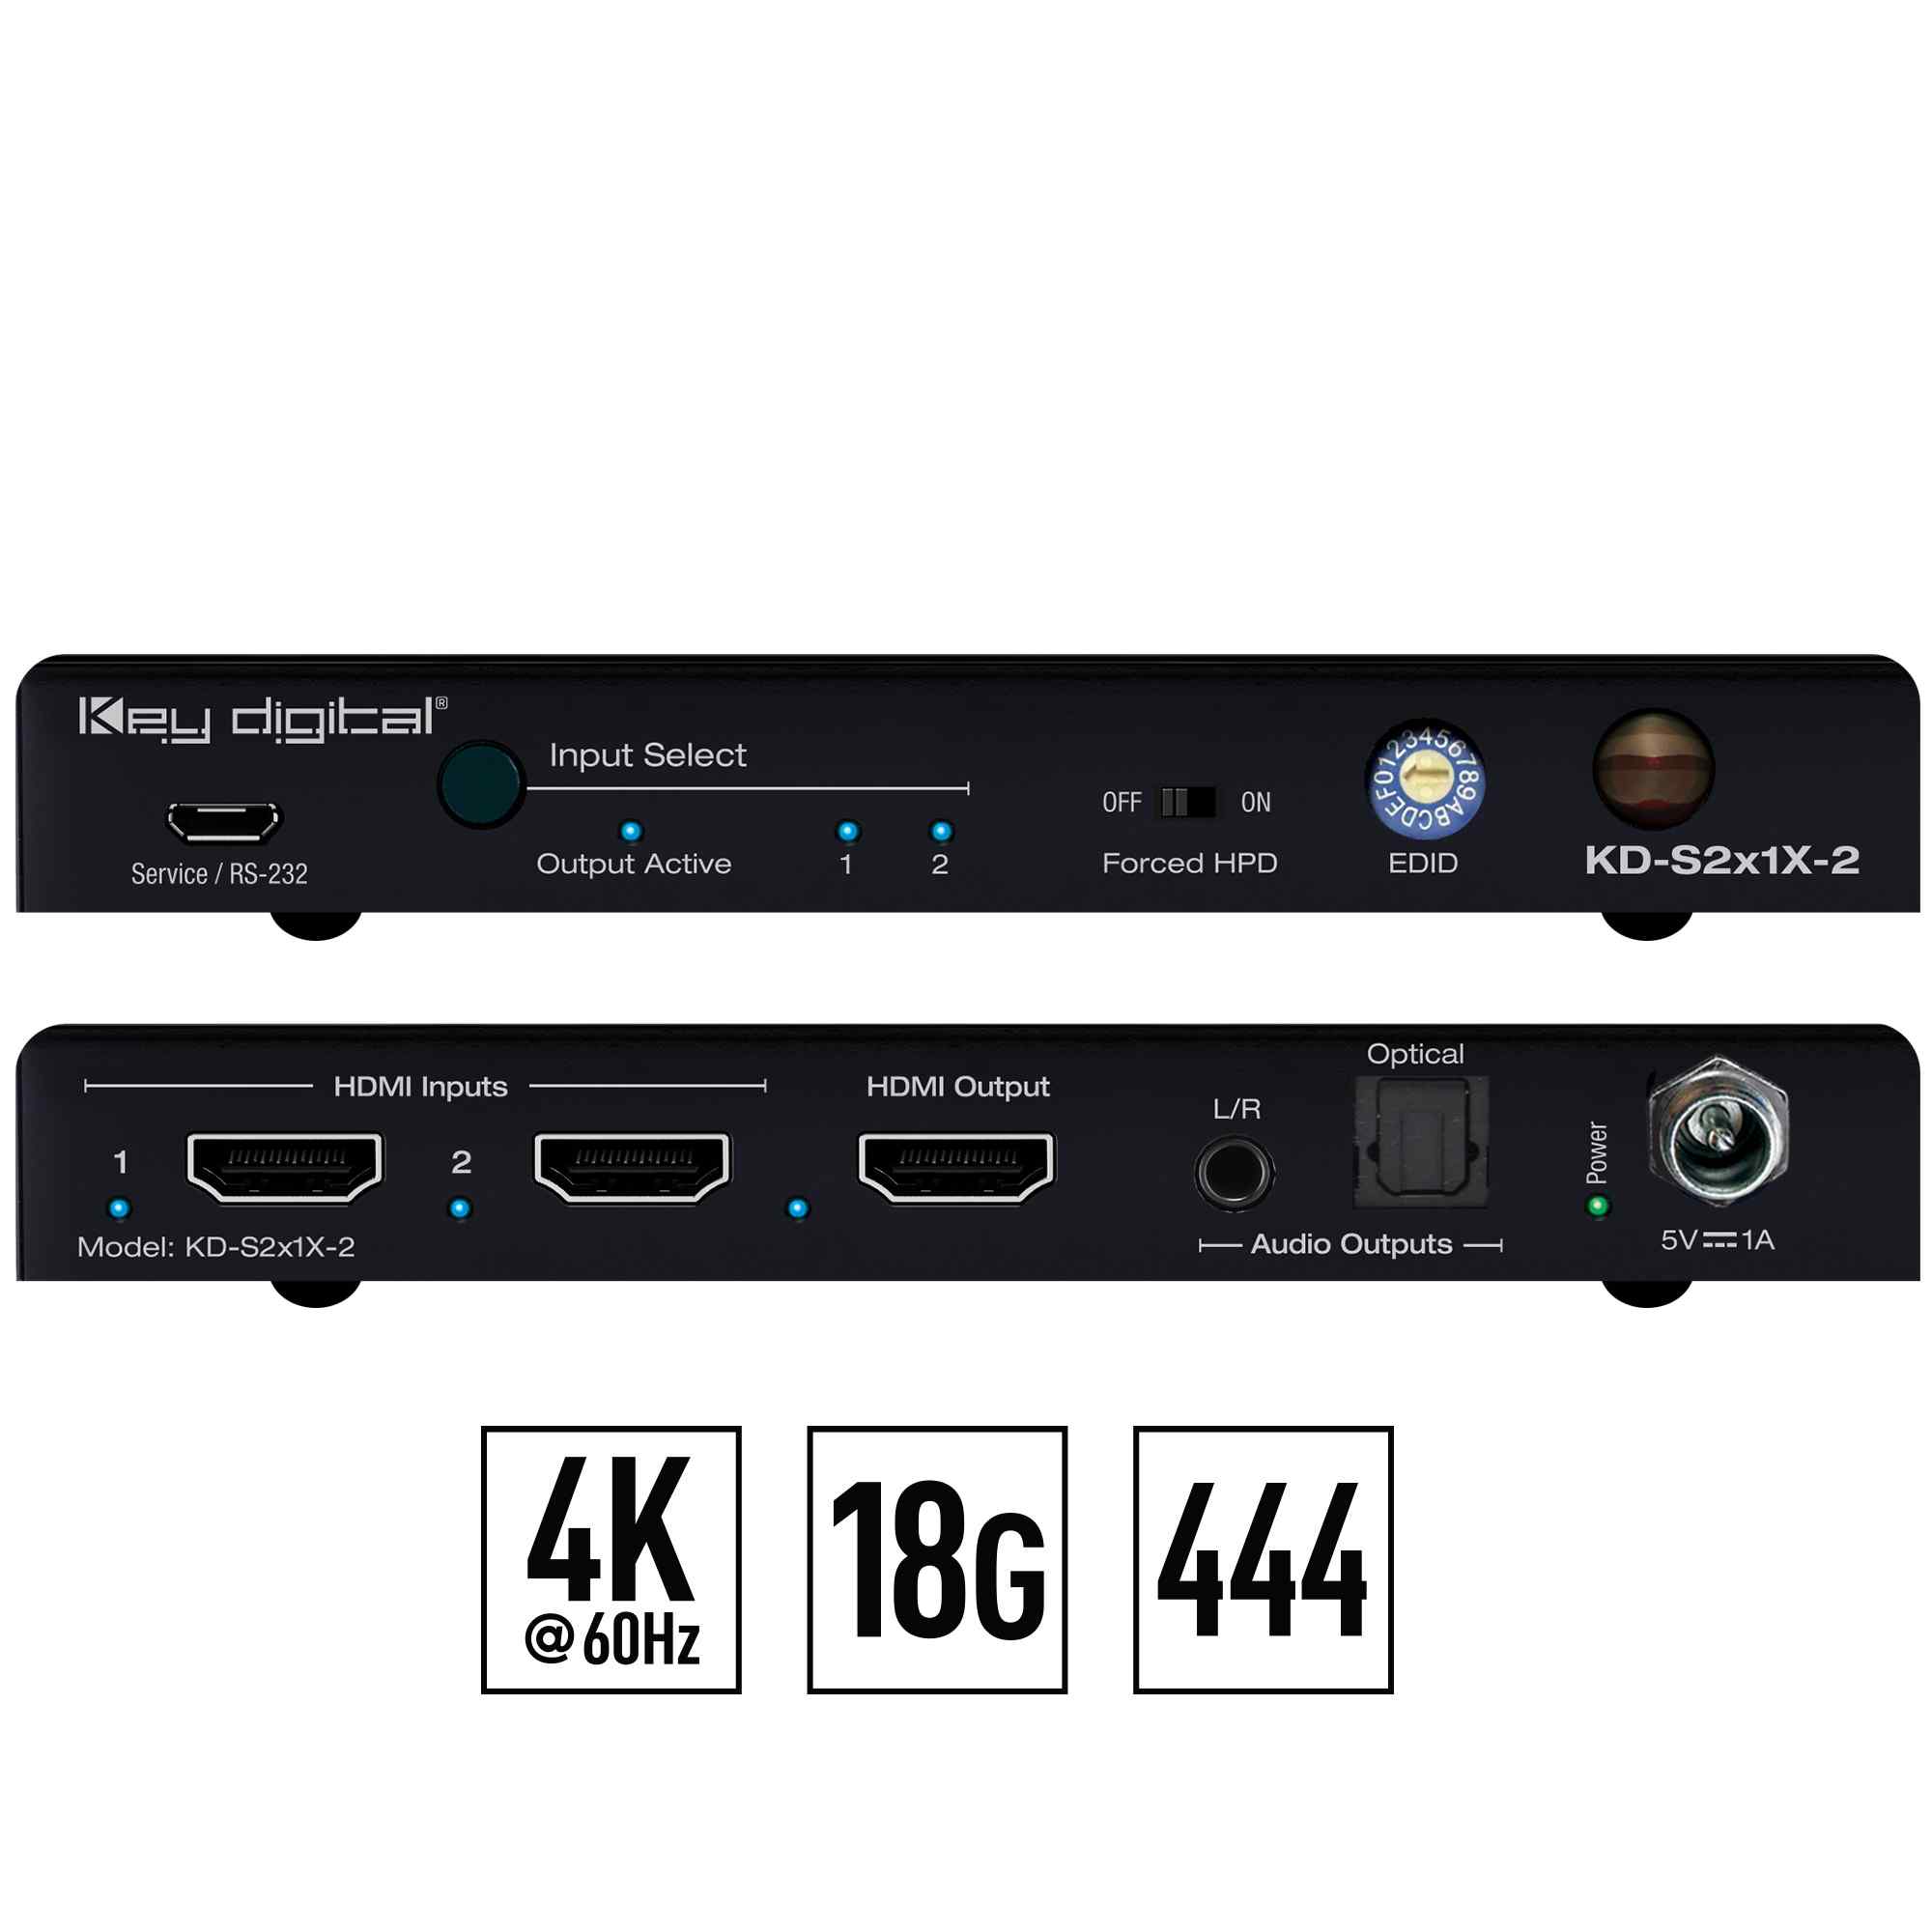 Key Digital hdmi 2 input 1 output Front and rear View